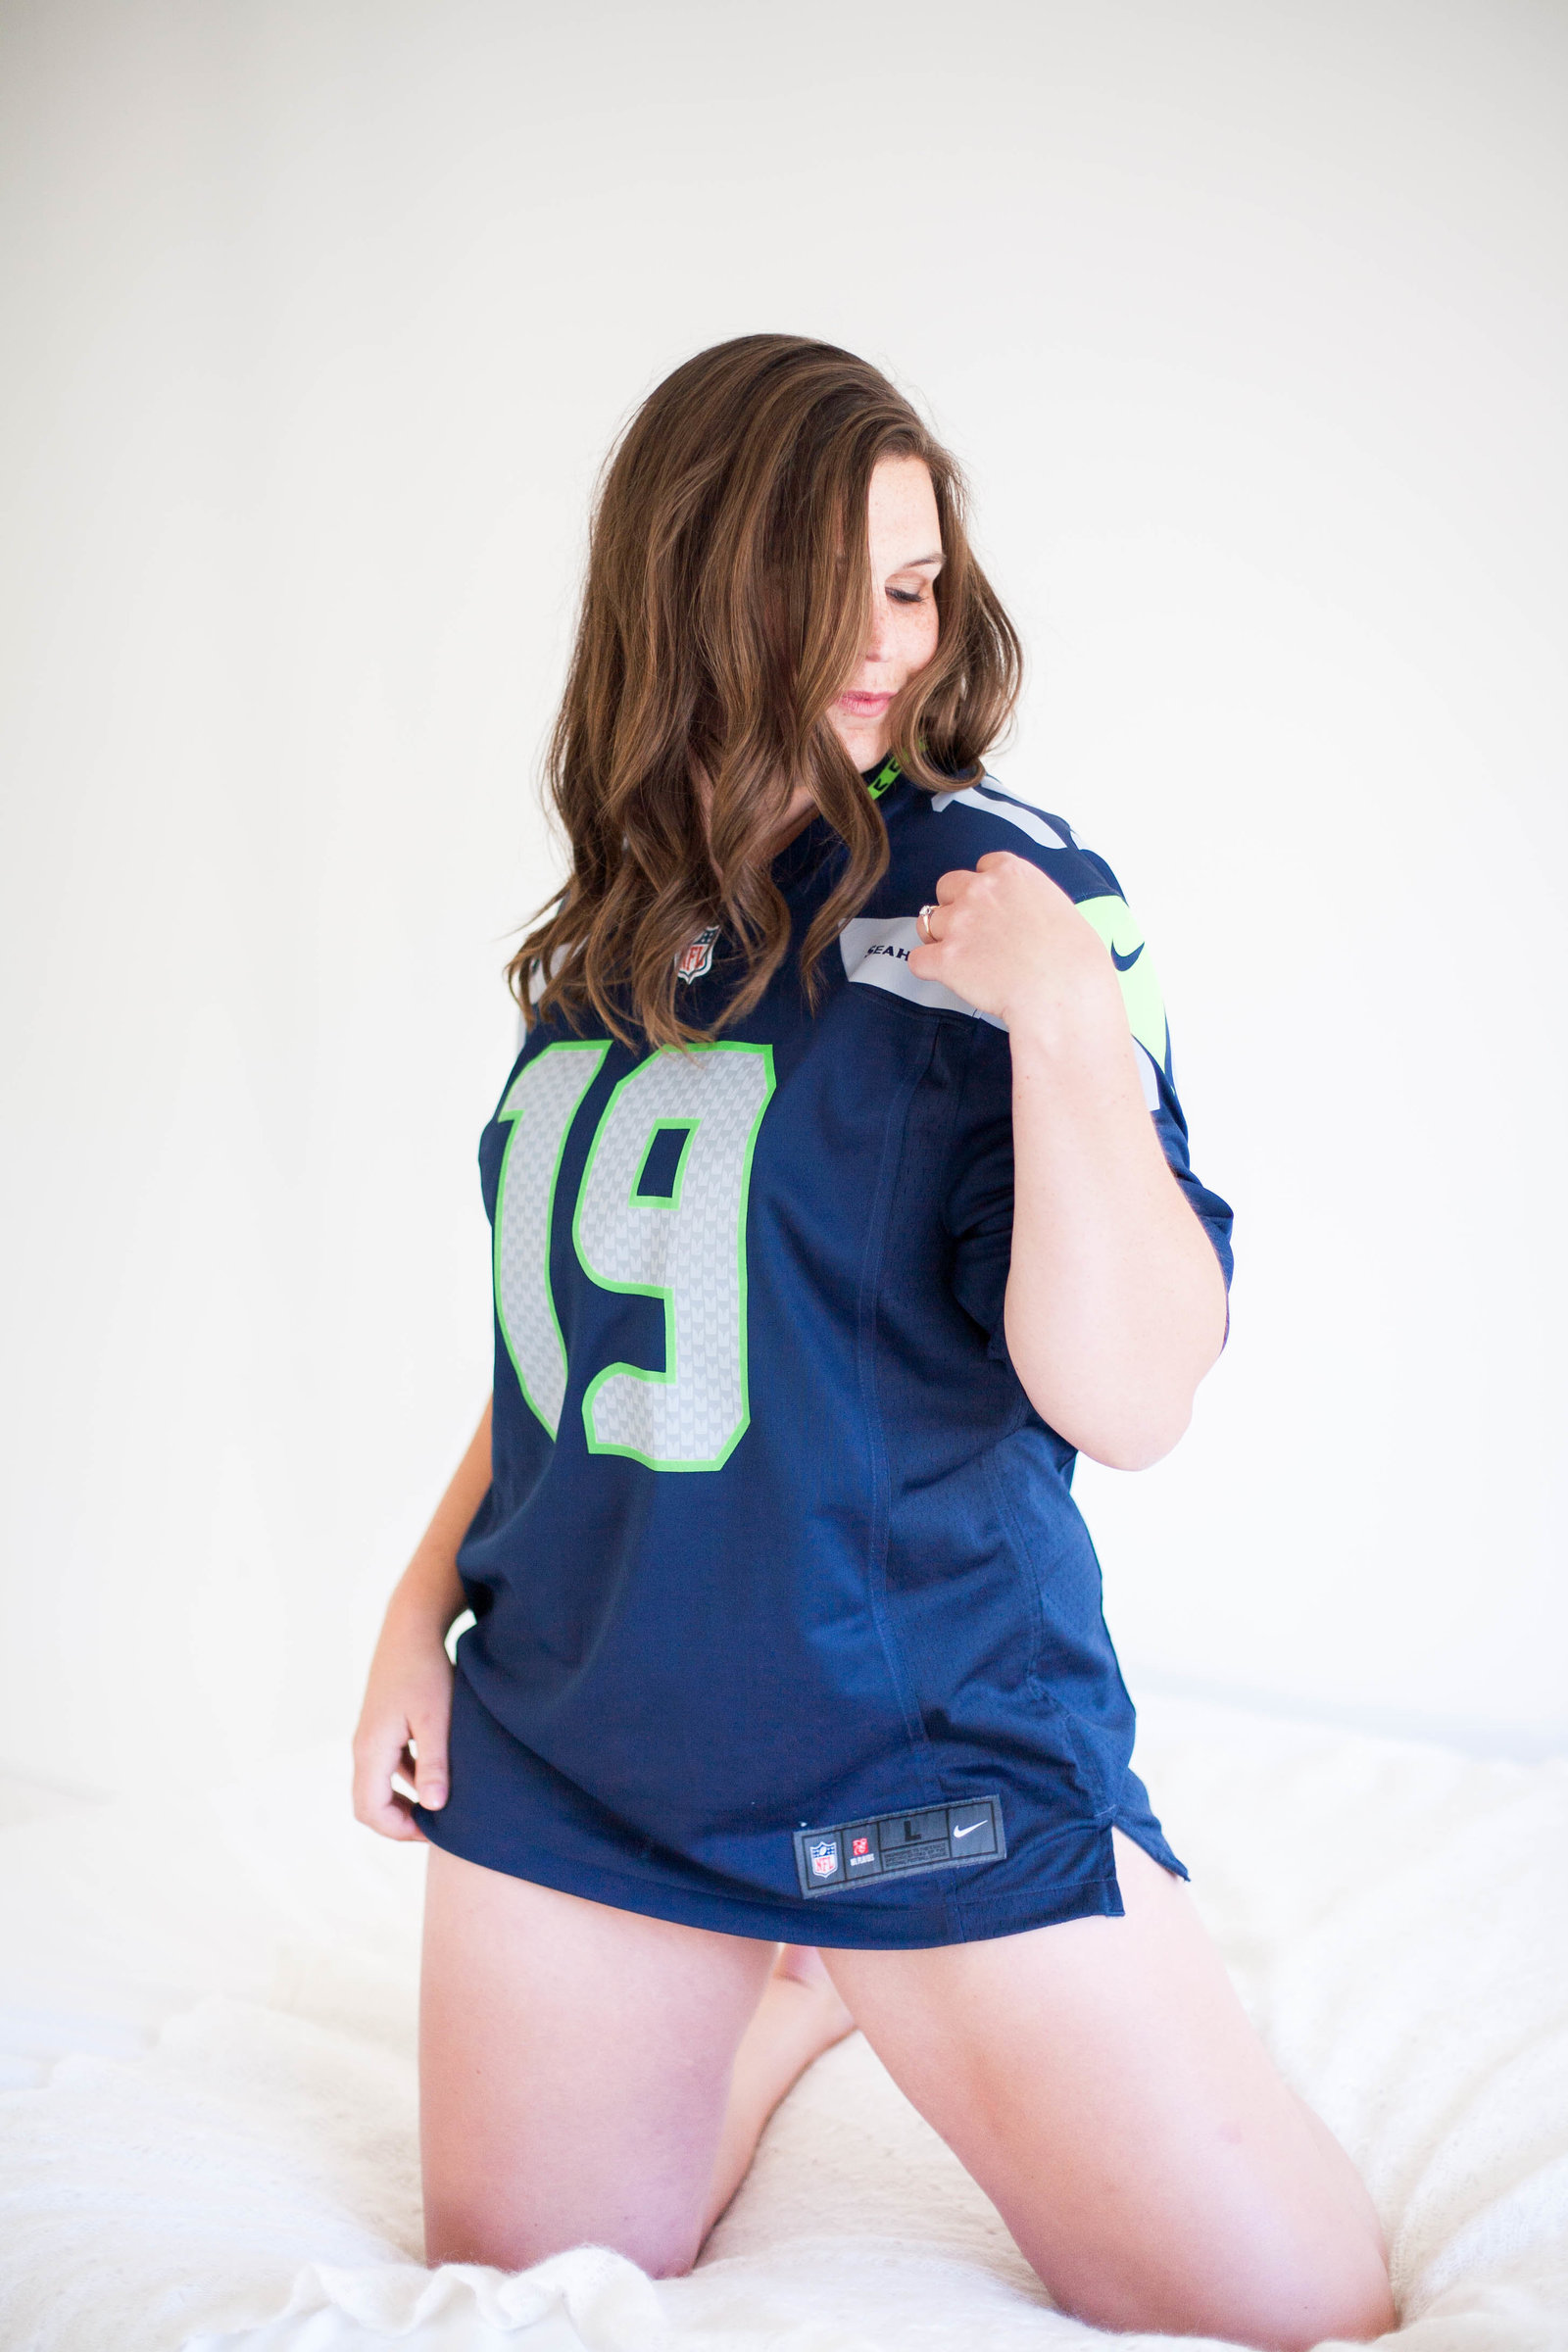 A classy boudoir photo of a woman in a Seahawks jersey.